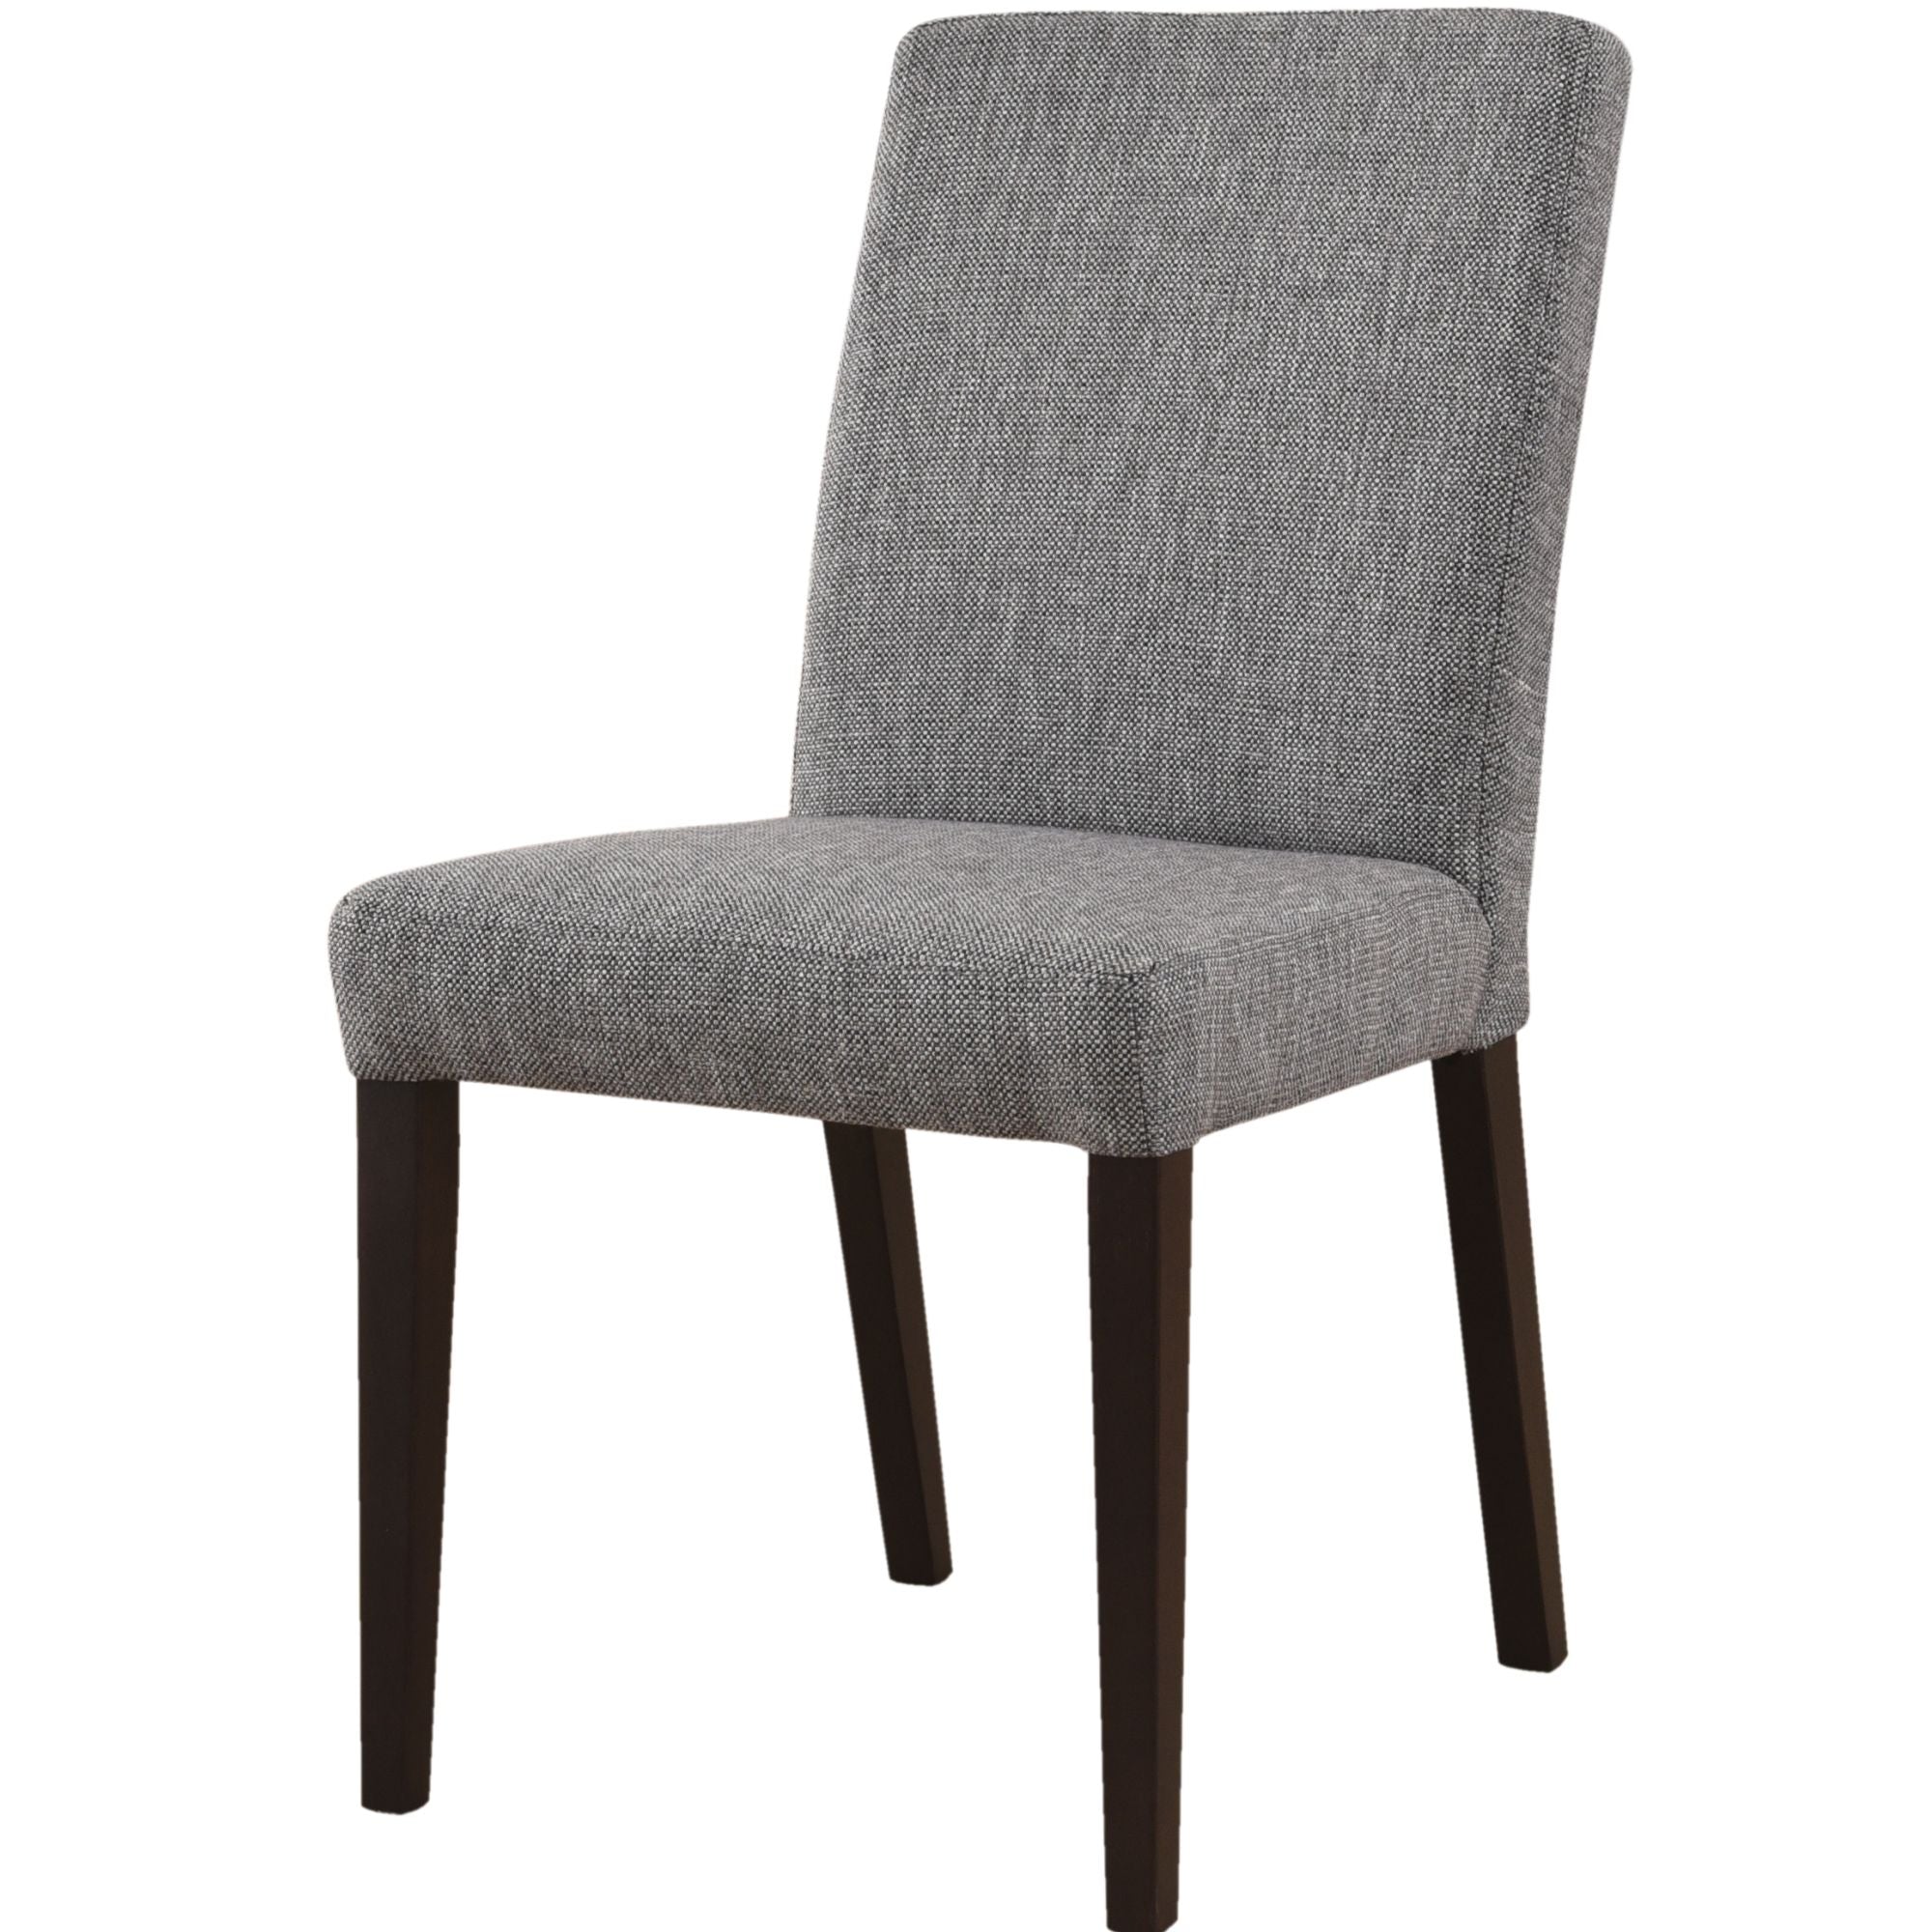 Dining Chair Set of 4 Fabric Upholstered Solid Acacia Wood - Granite